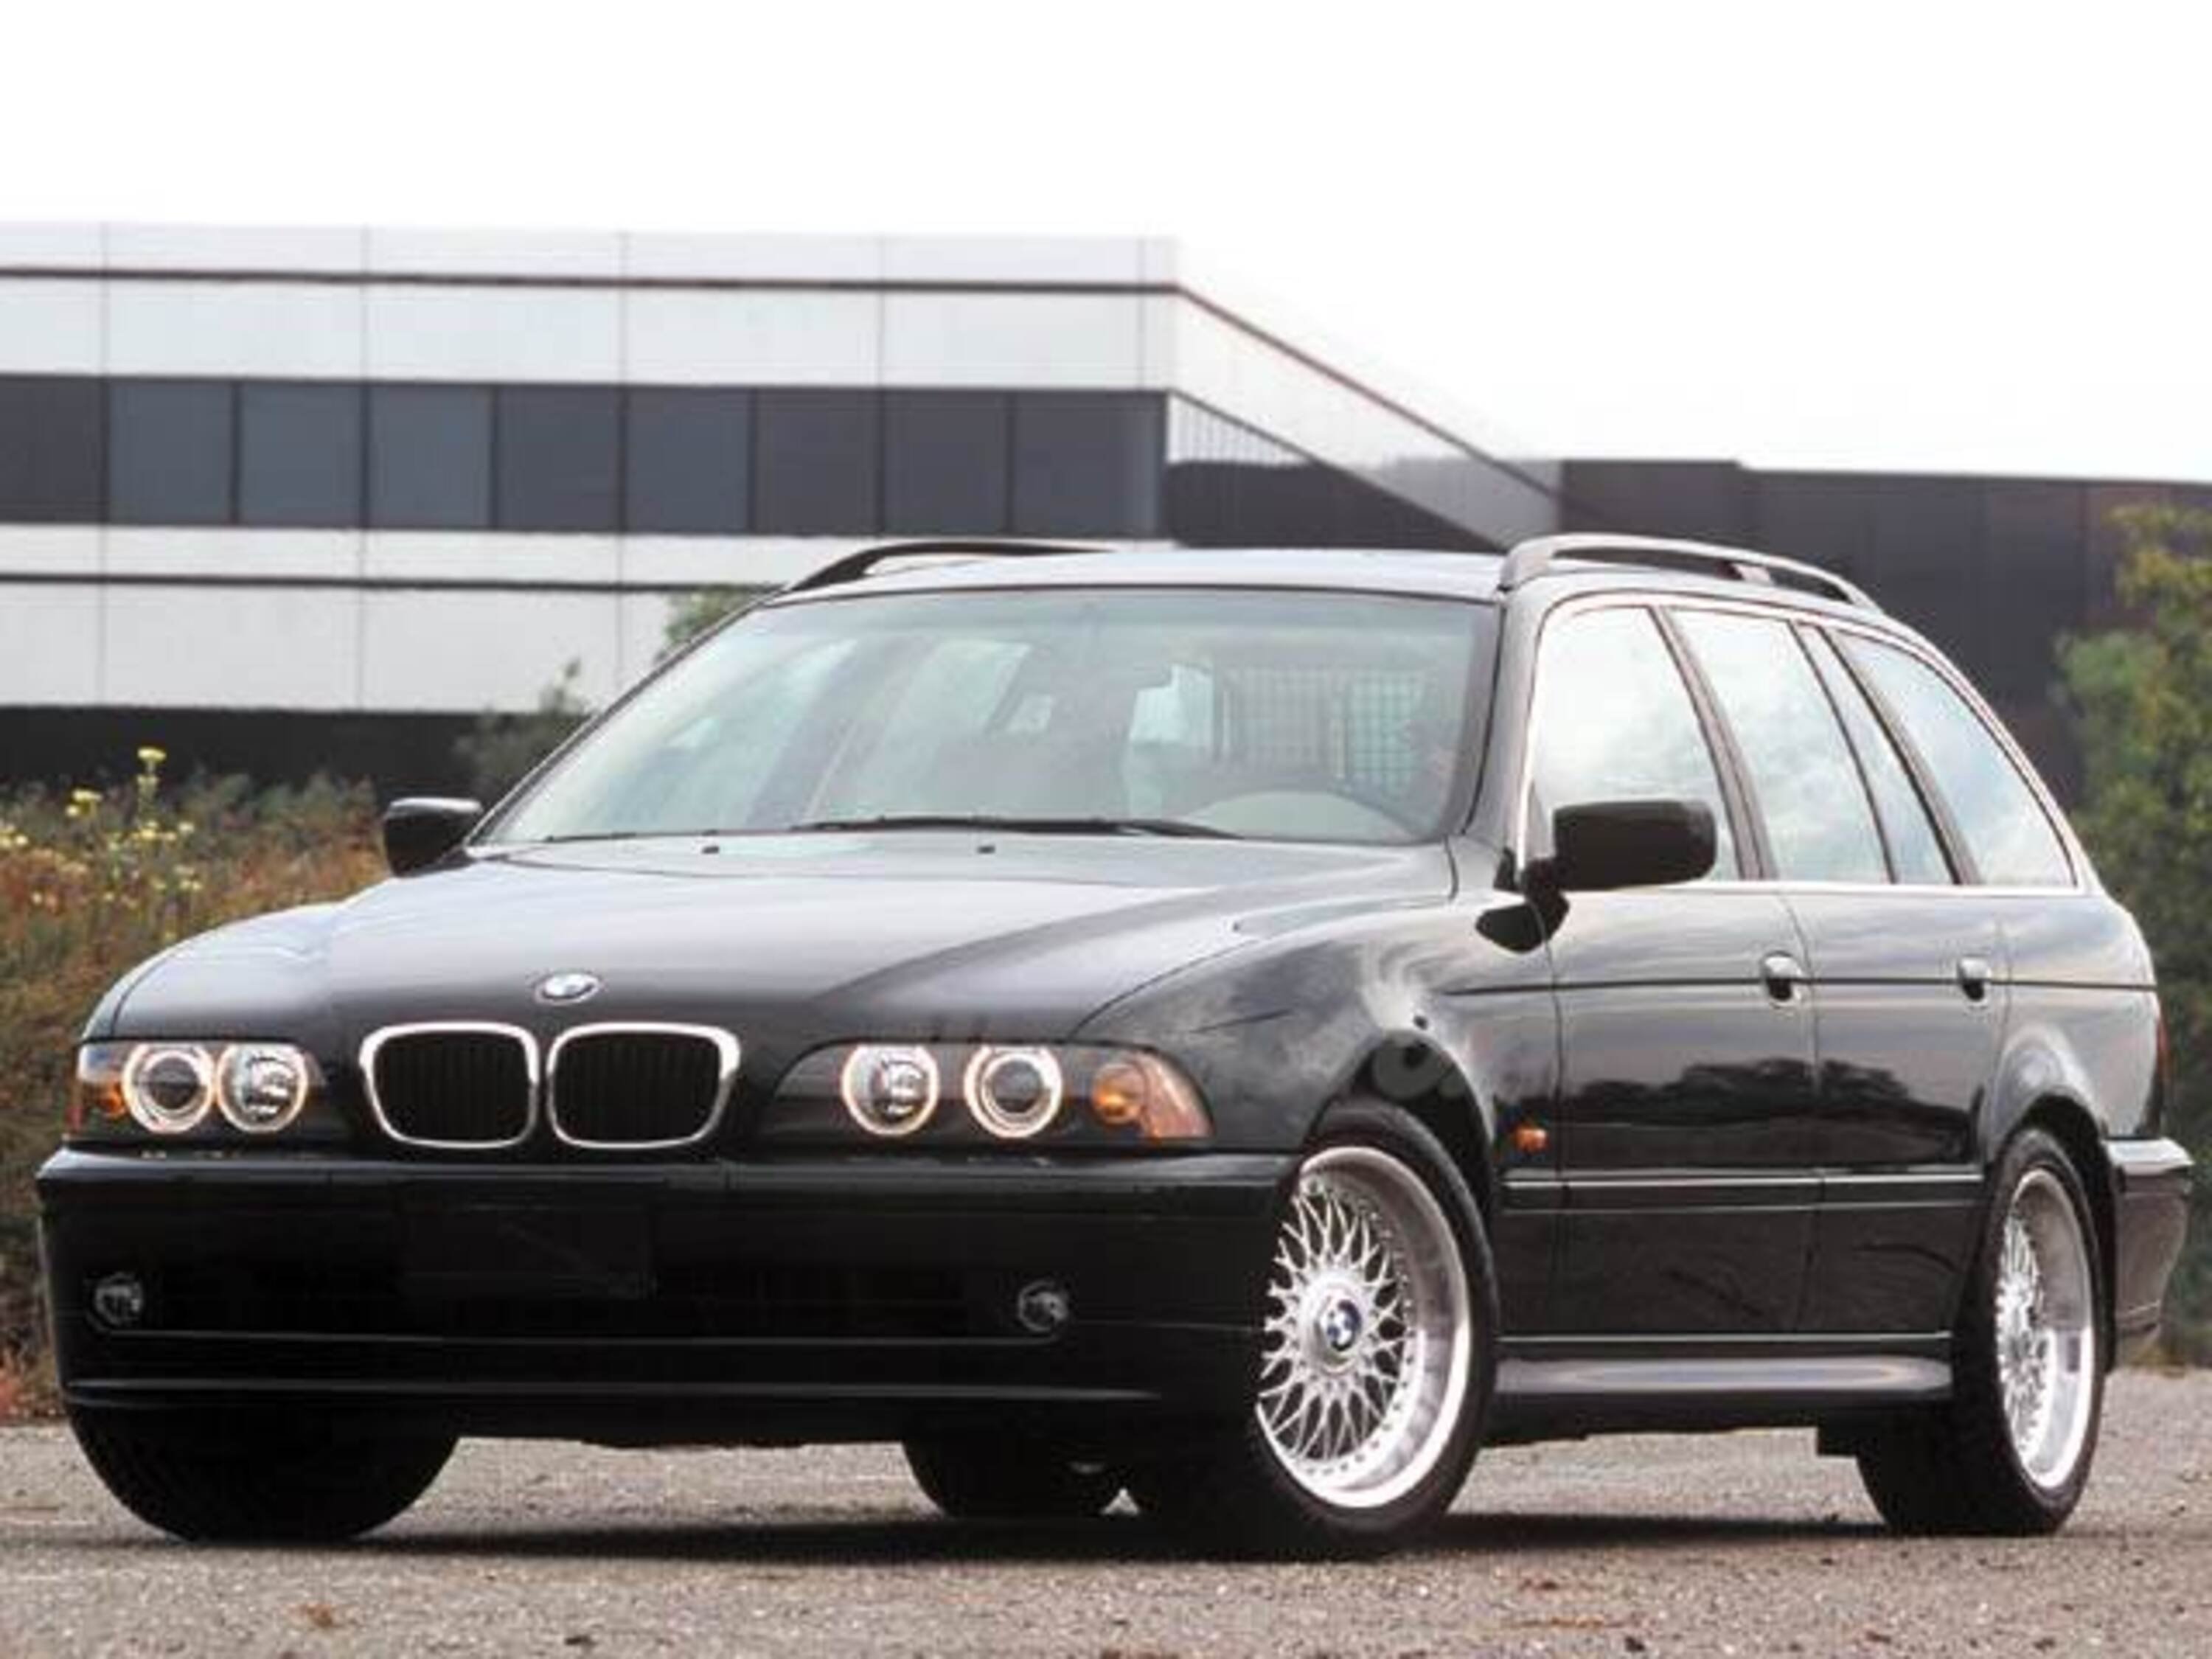 BMW Serie 5 Touring 540i 4.4 cat 